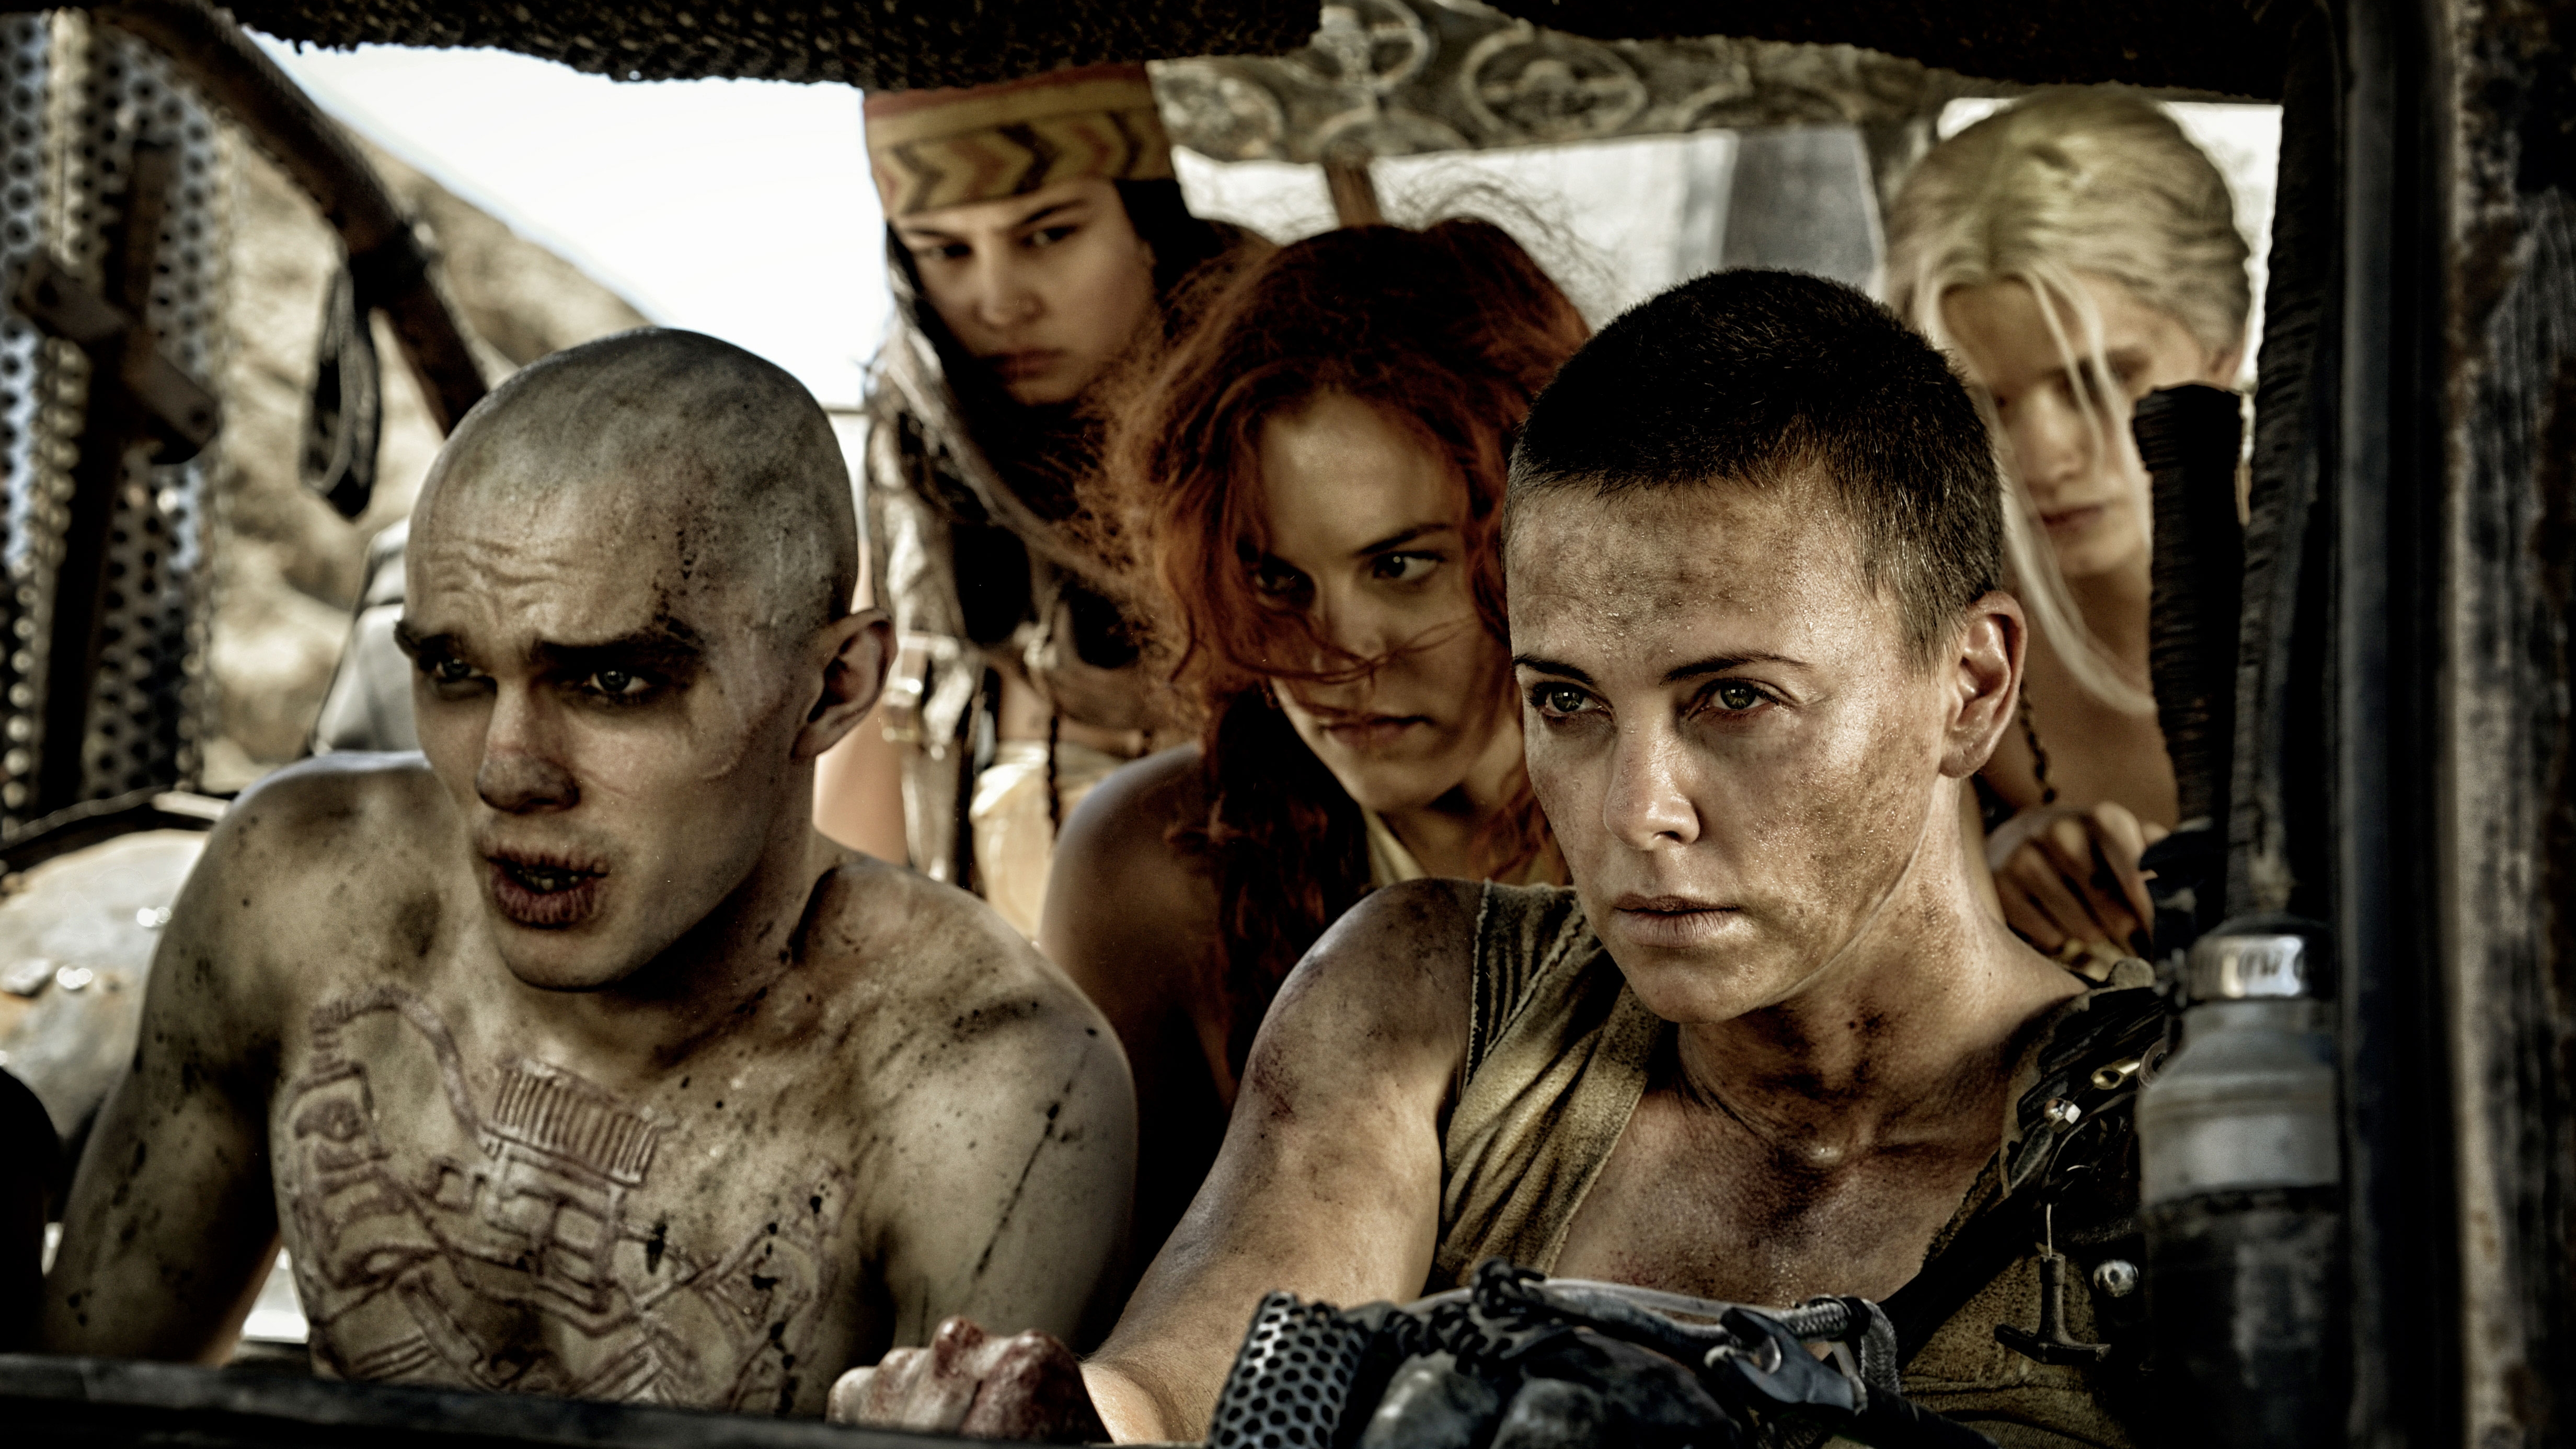 Capable Mad Max Charlize Theron Imperator Furiosa Nicholas Hoult Nux Mad Max Riley Keough 4928x2772